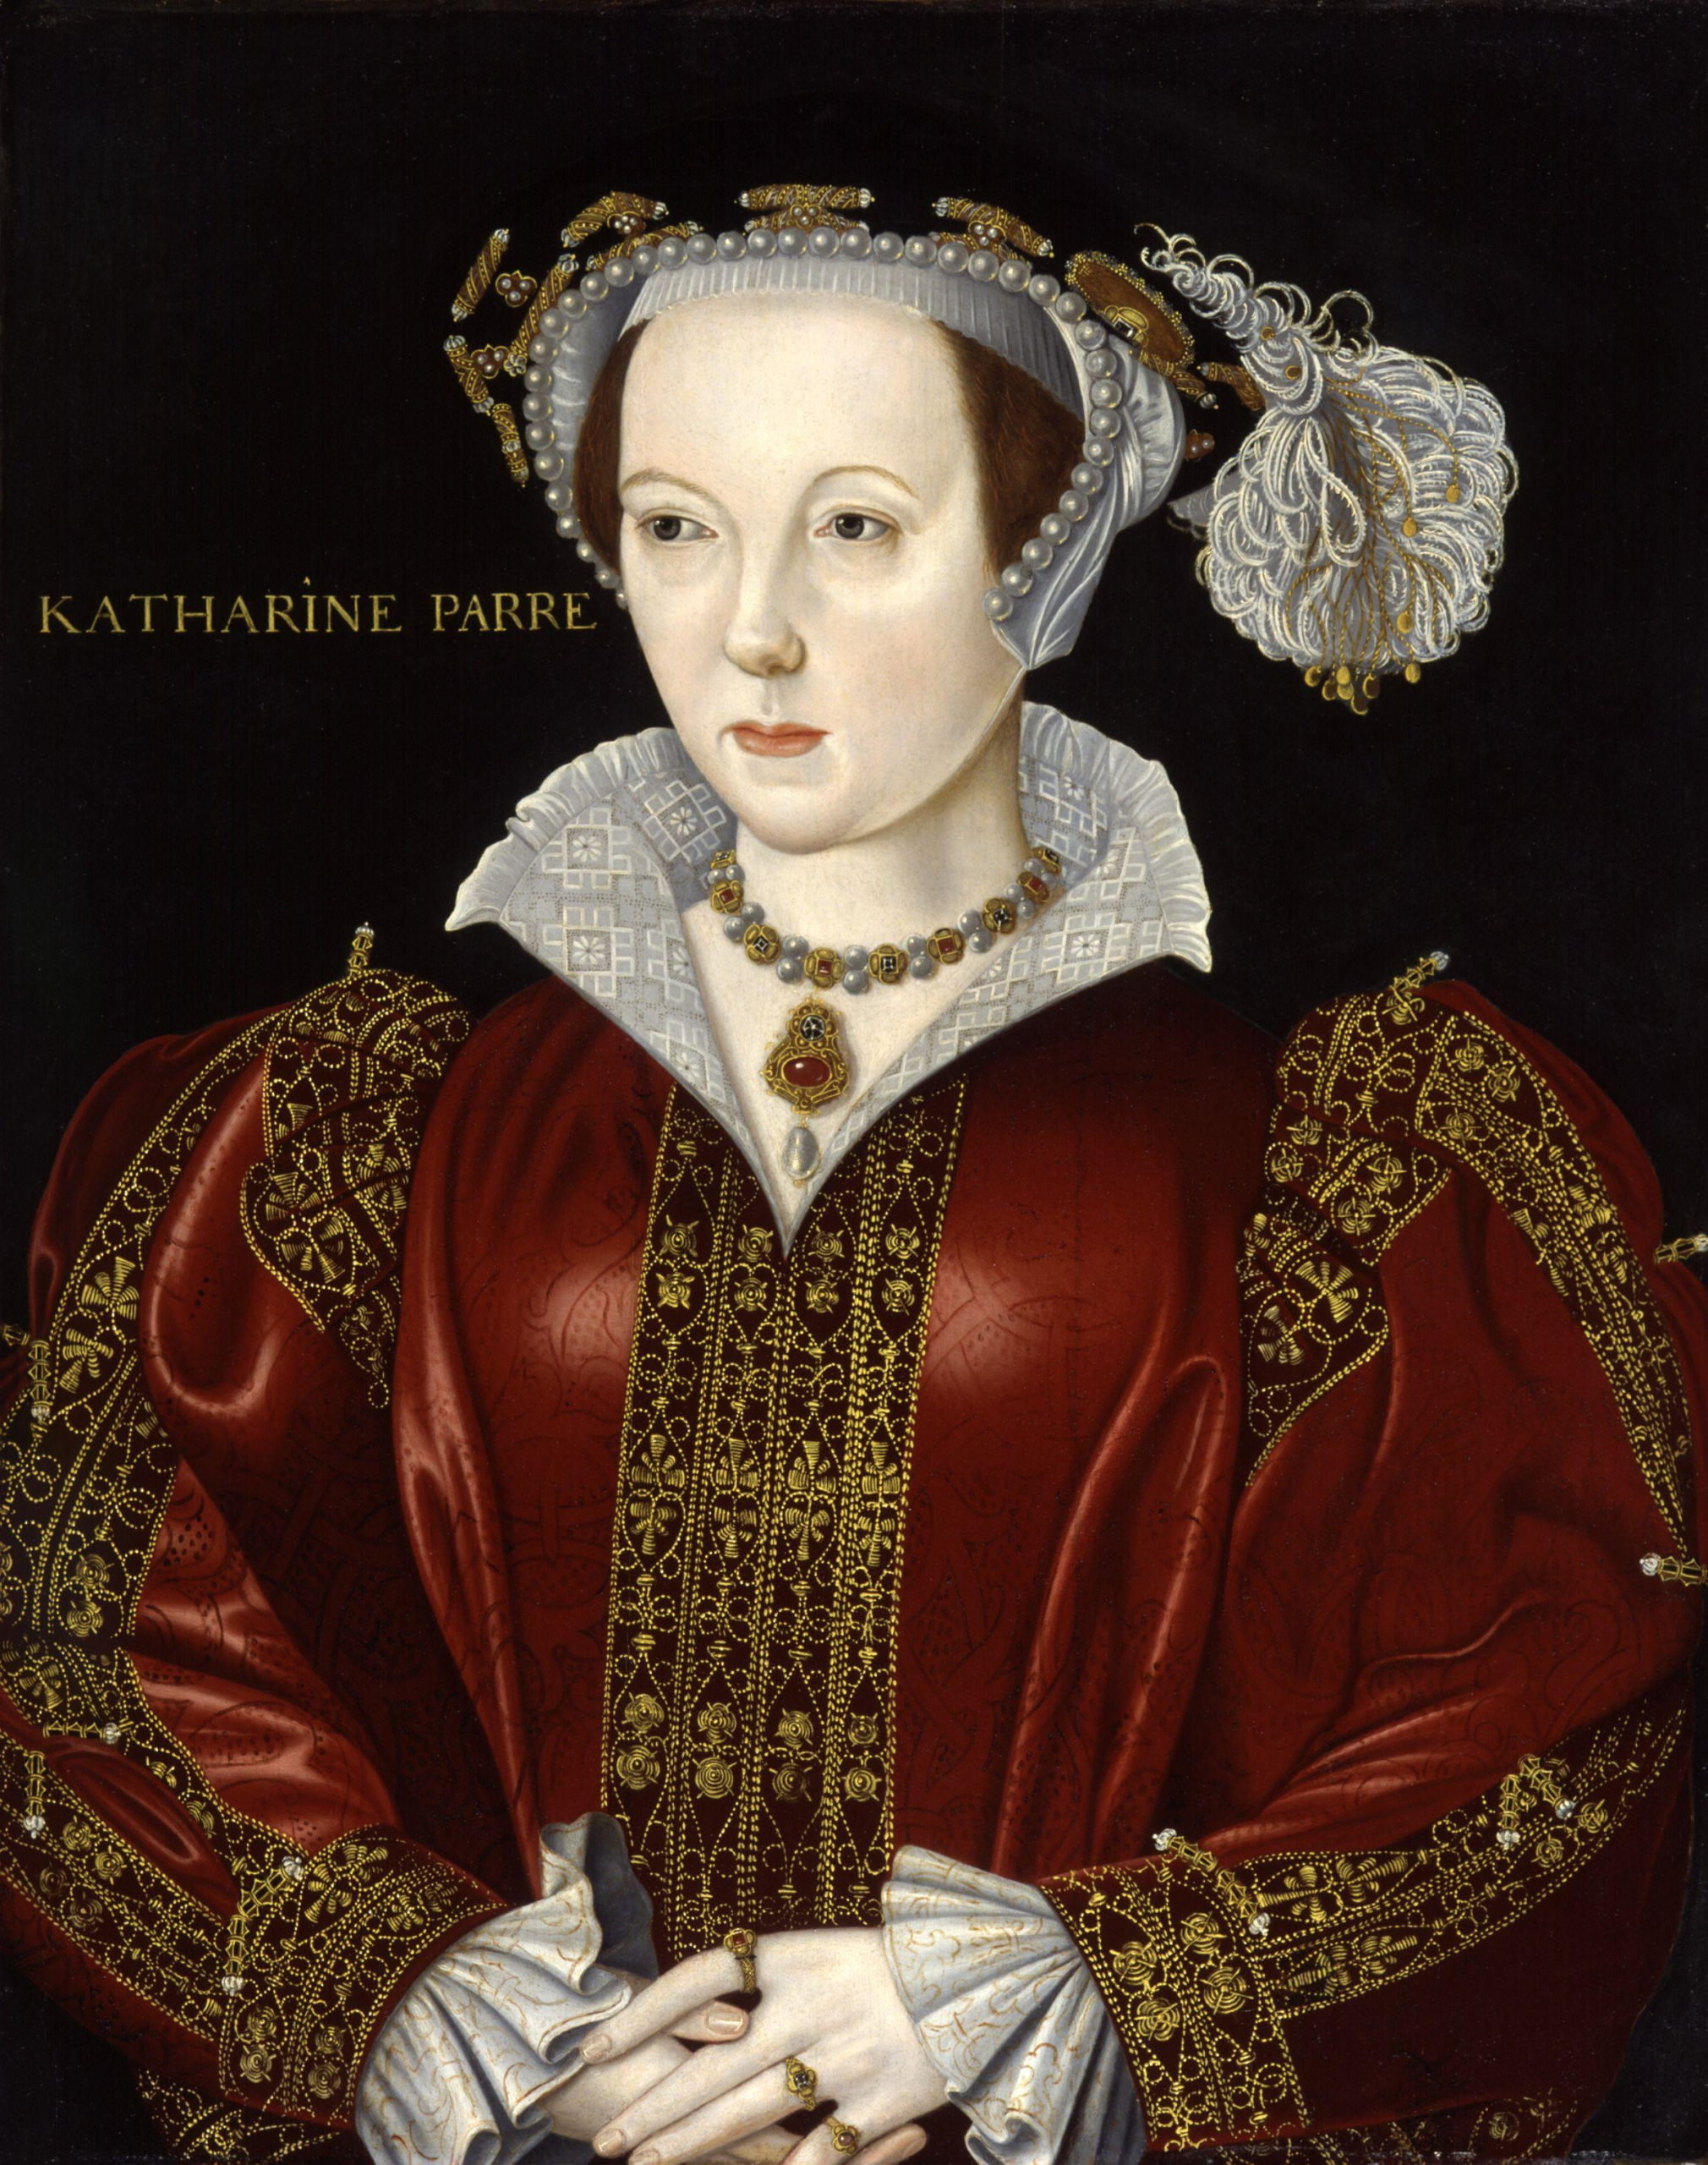 March 2, 1543: Lord Latimer Dies, Leaving Katherine Parr a Rich Widow